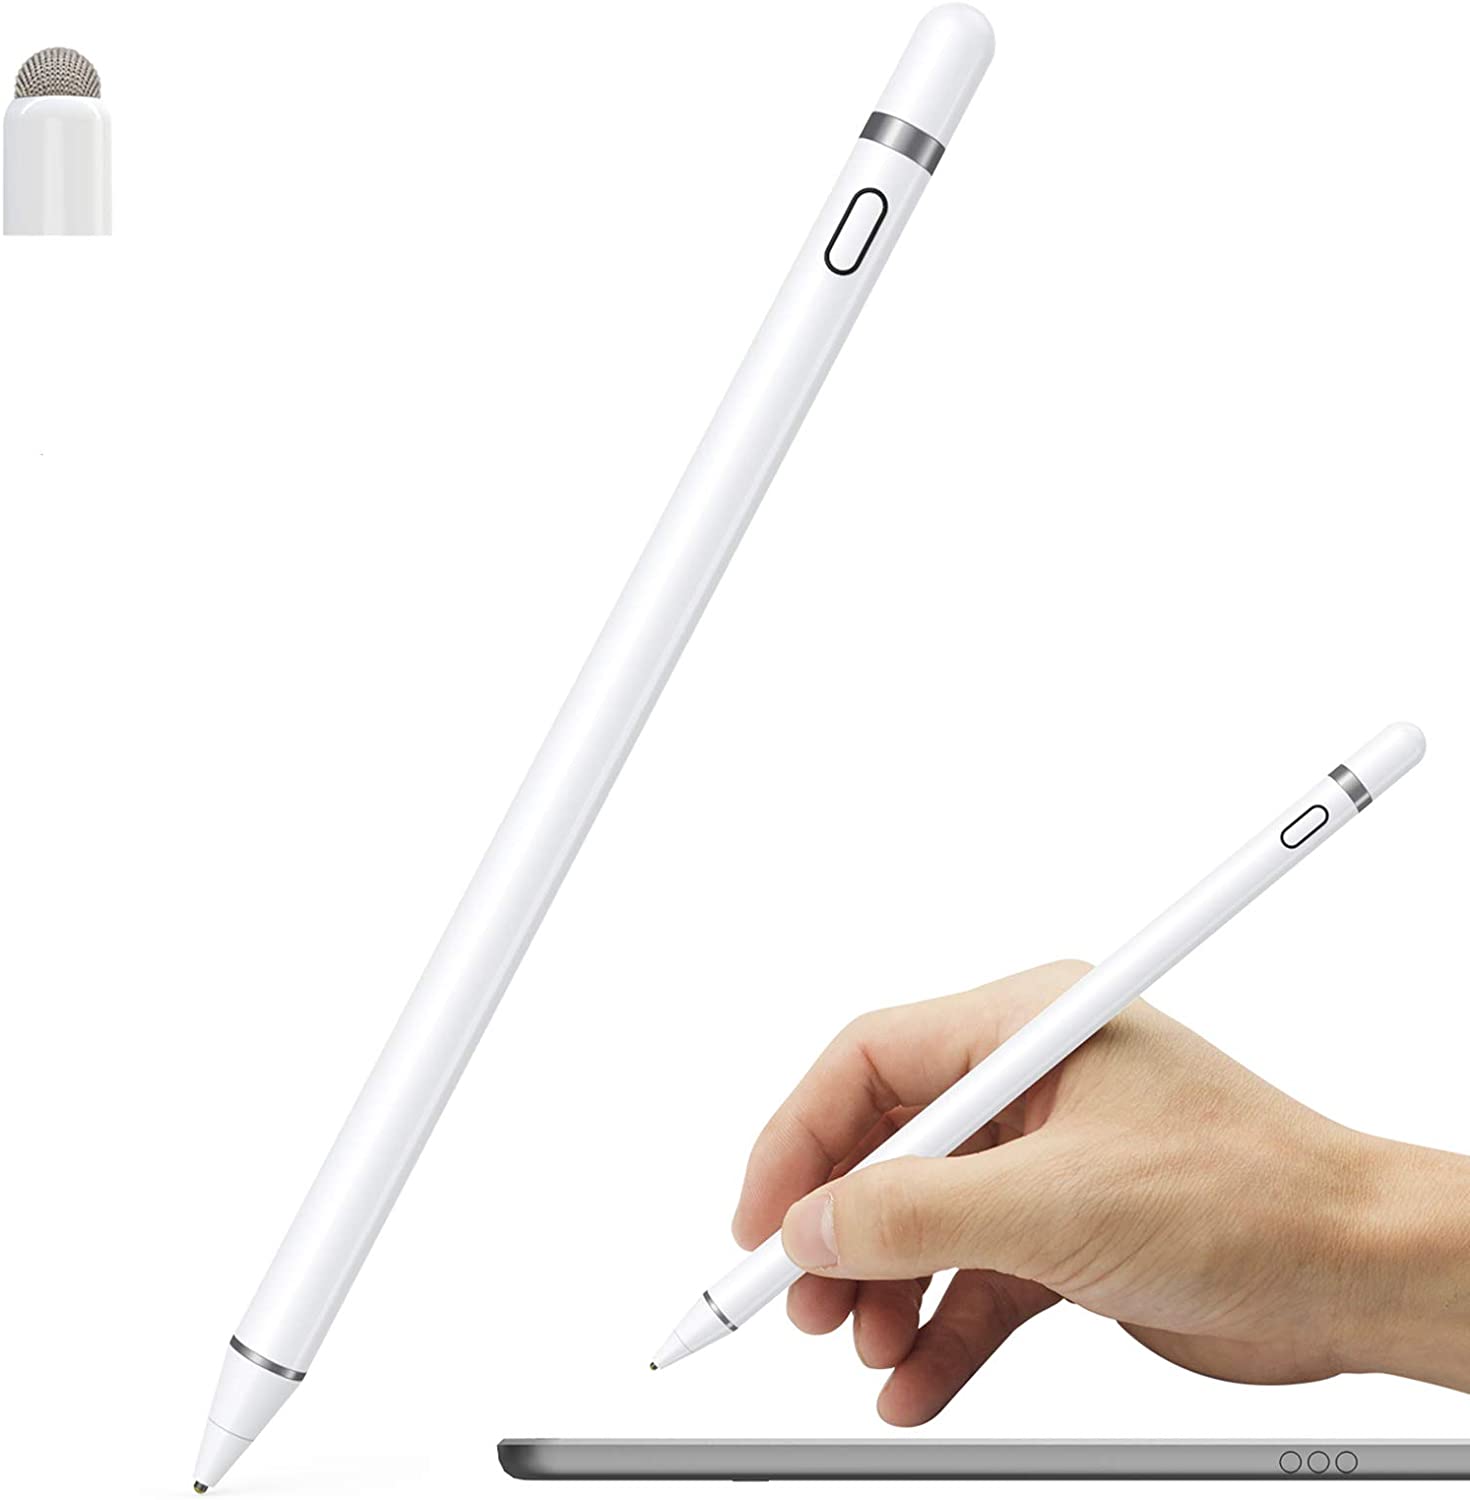 Factory Promotional Tablet Pencil Tip - Active Stylus Pen Compatible for iOS&Android Touch Screens, Pencil for iPad with Dual Touch Function,Rechargeable Stylus for iPad/iPad Pro/Air/Mini/iPho...